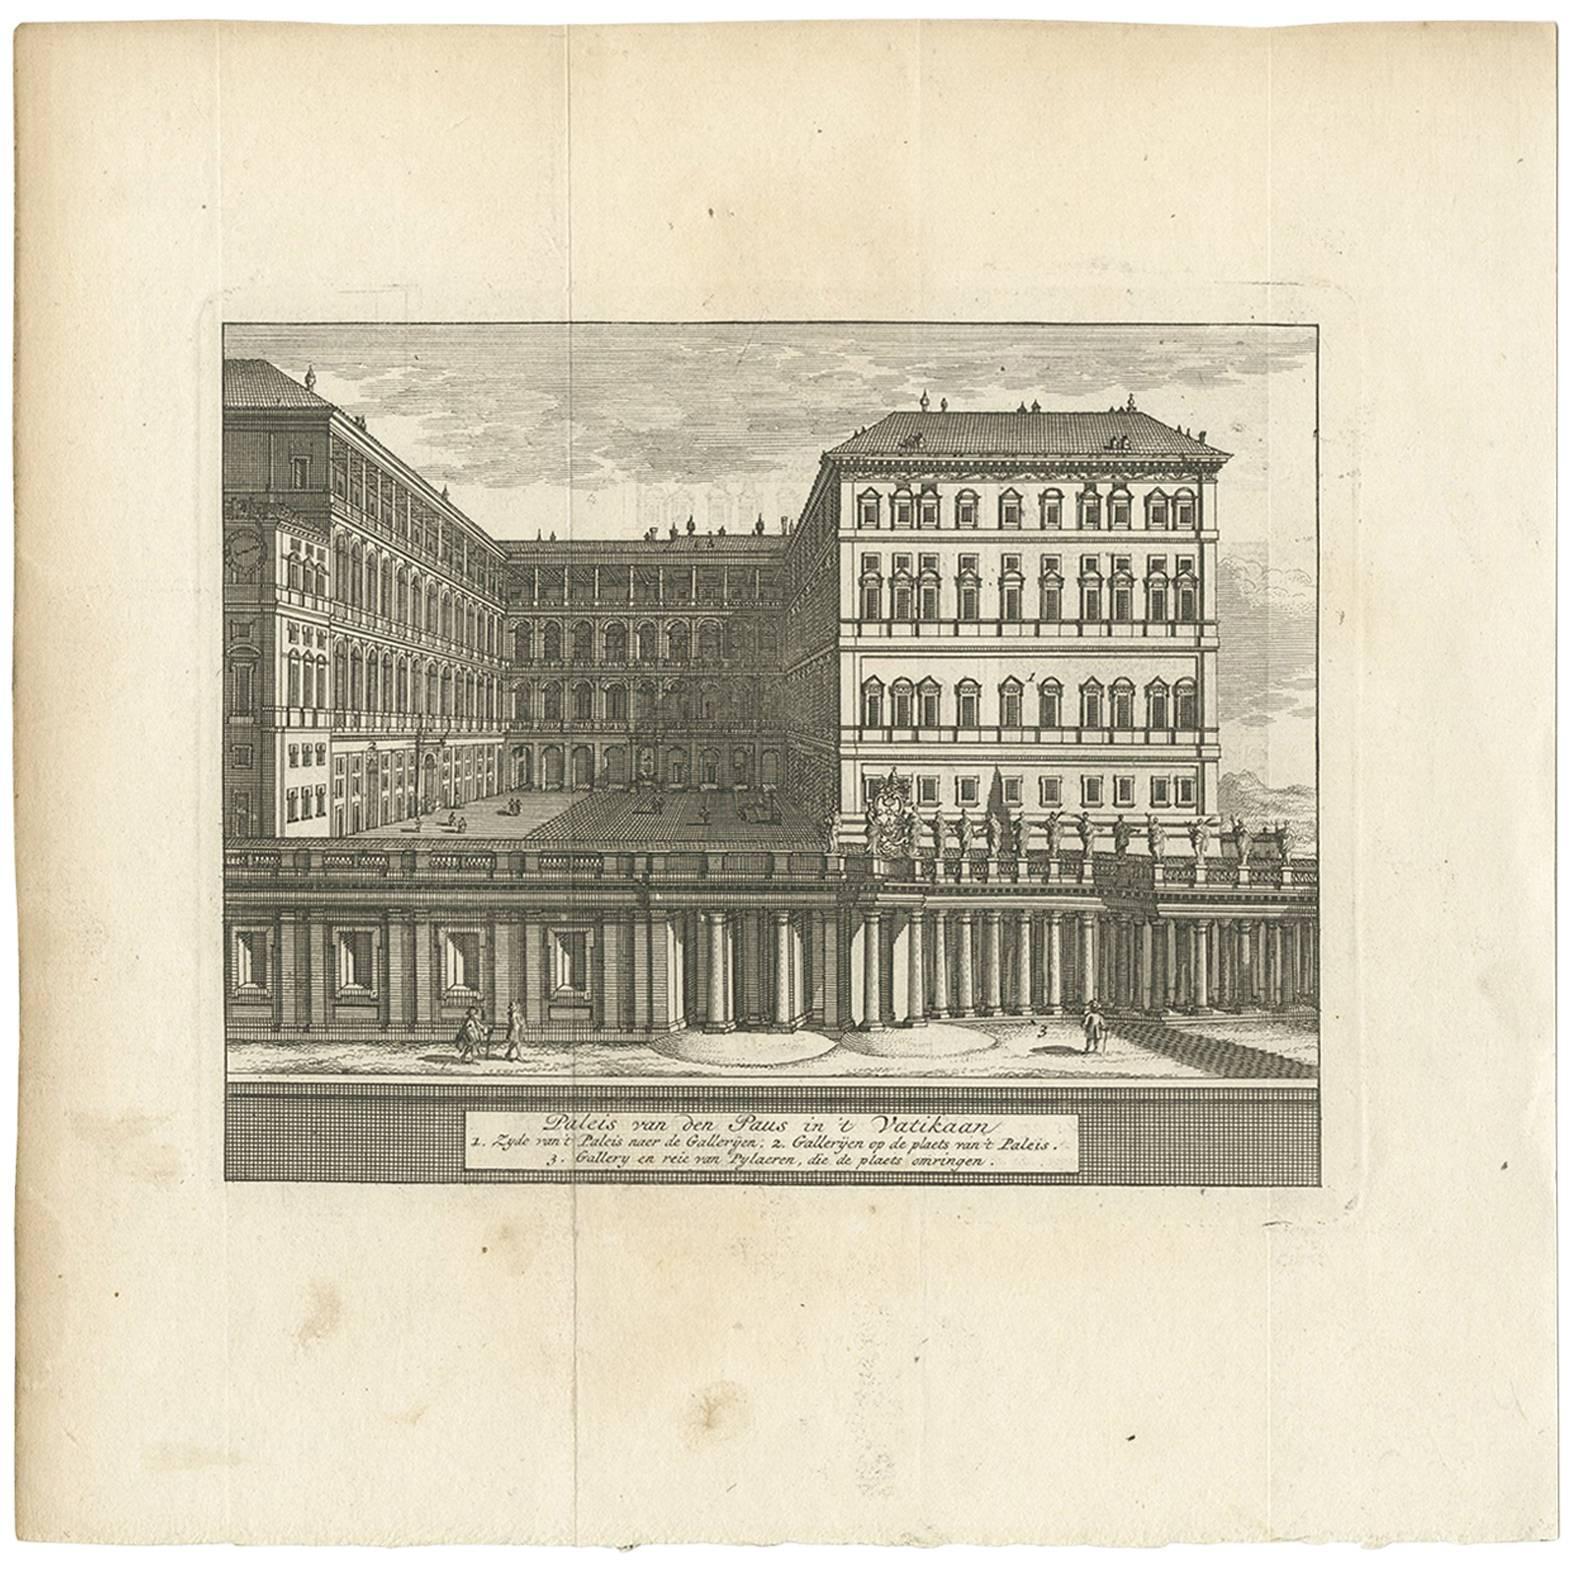 Antique Print of the Apostolic Palace in Rome by M. de Bruyn, 1779